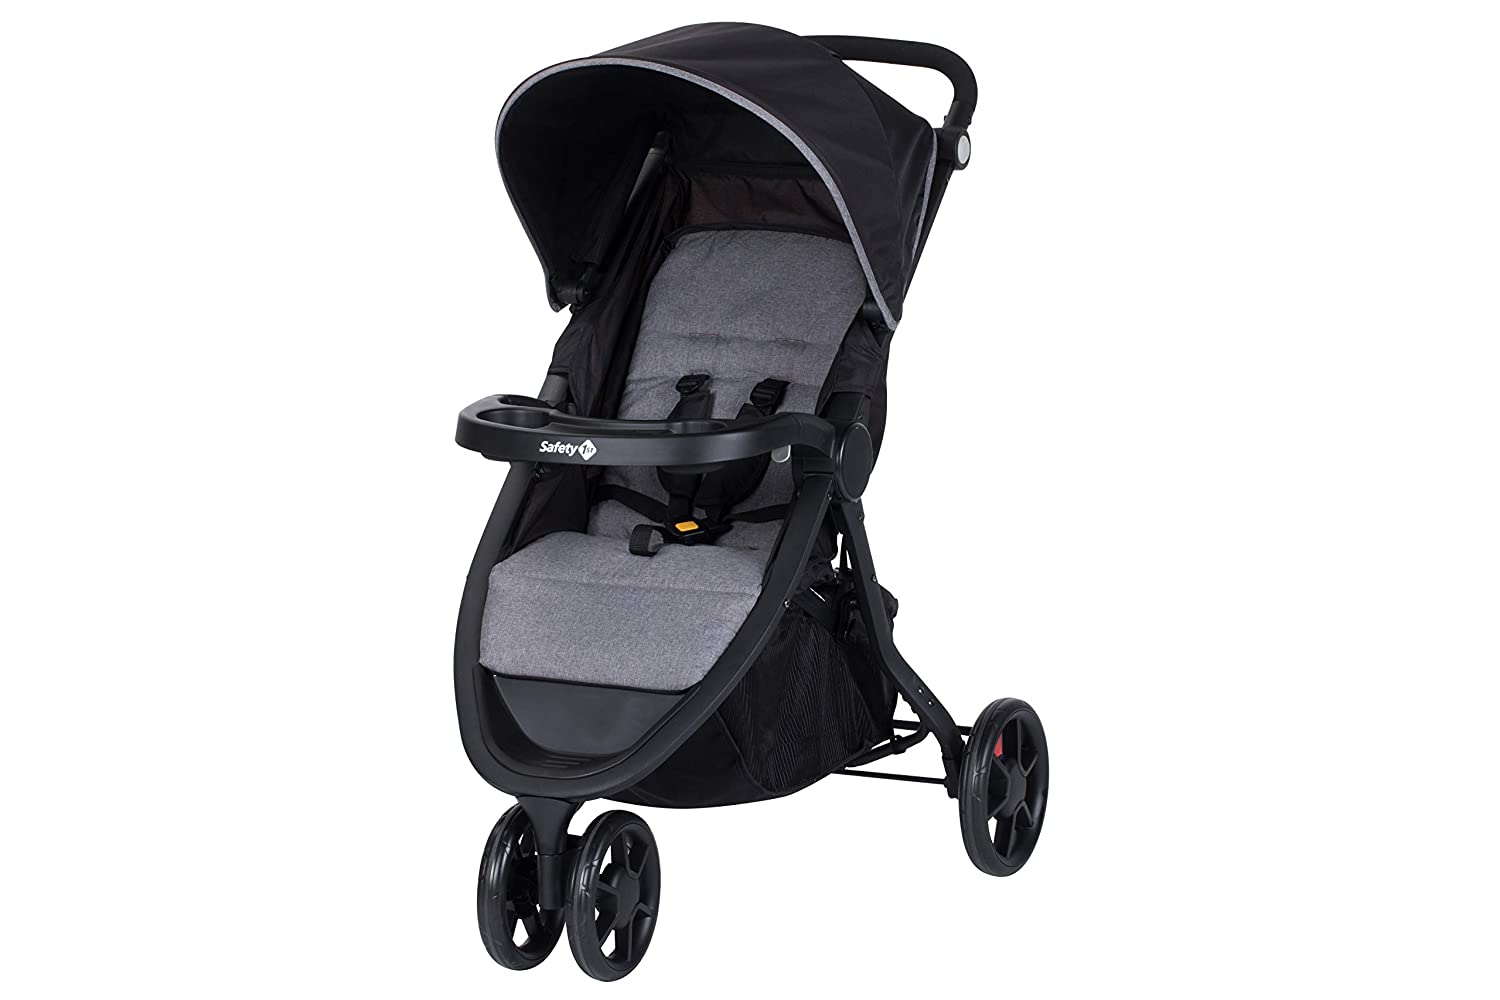 Safety 1st Urban Trek Sporty Pushchair with Reclining Position, Easy to Fold, Usable from 6 Months to Approx. 15 kg, Black Chic (Black)